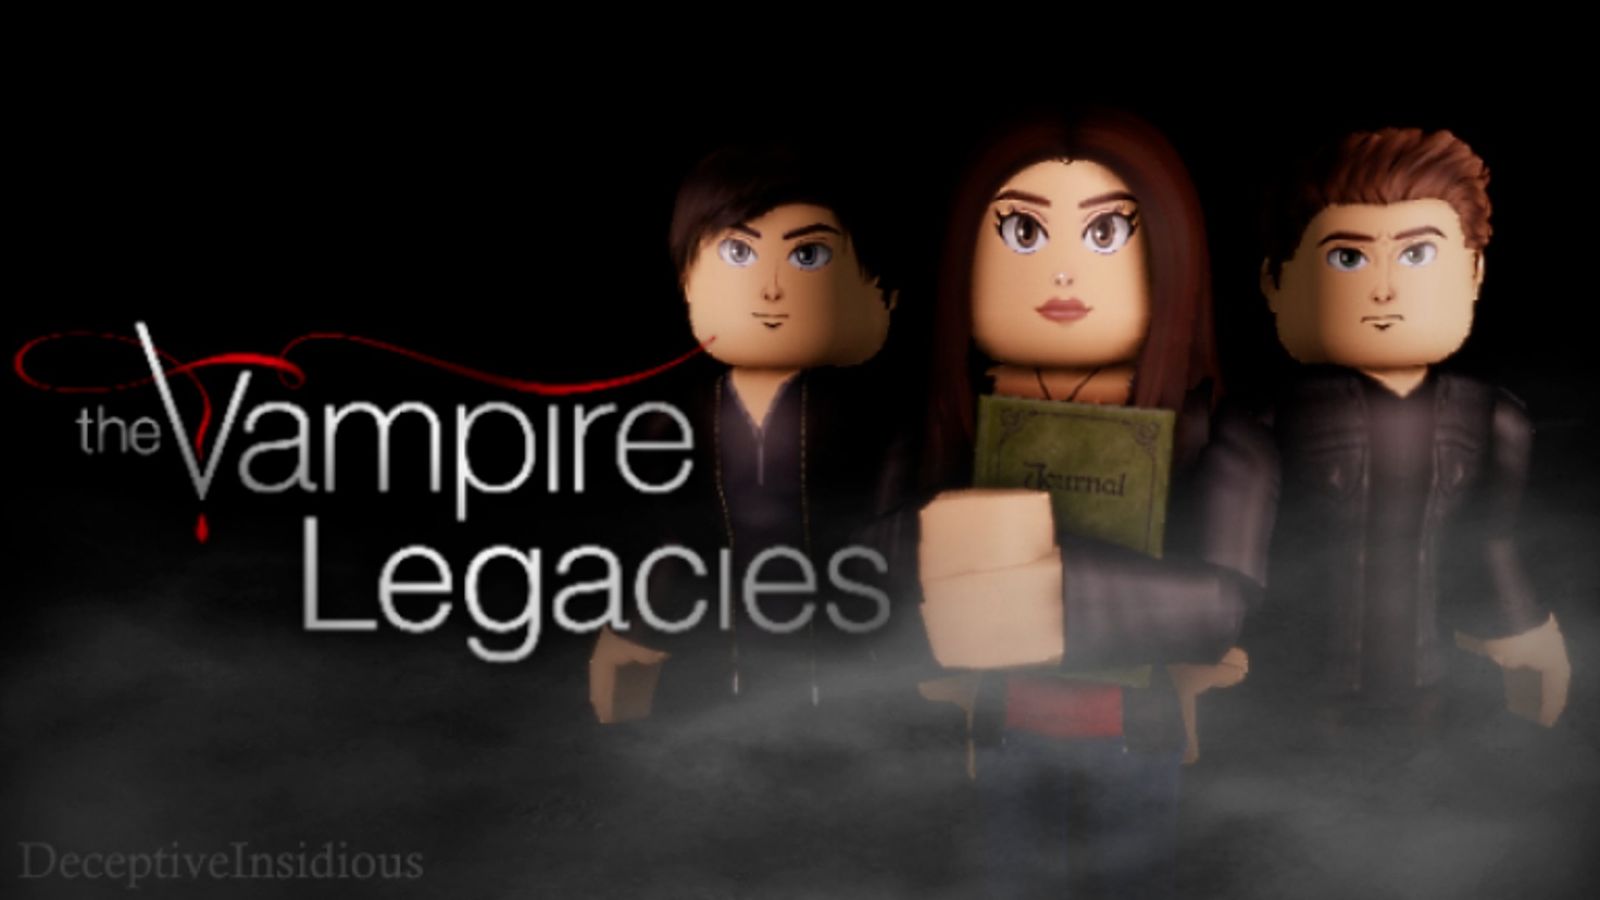 Screenshot from The Vampire Legacies, showing three Roblox icons stylised as The Vampire Diaries characters